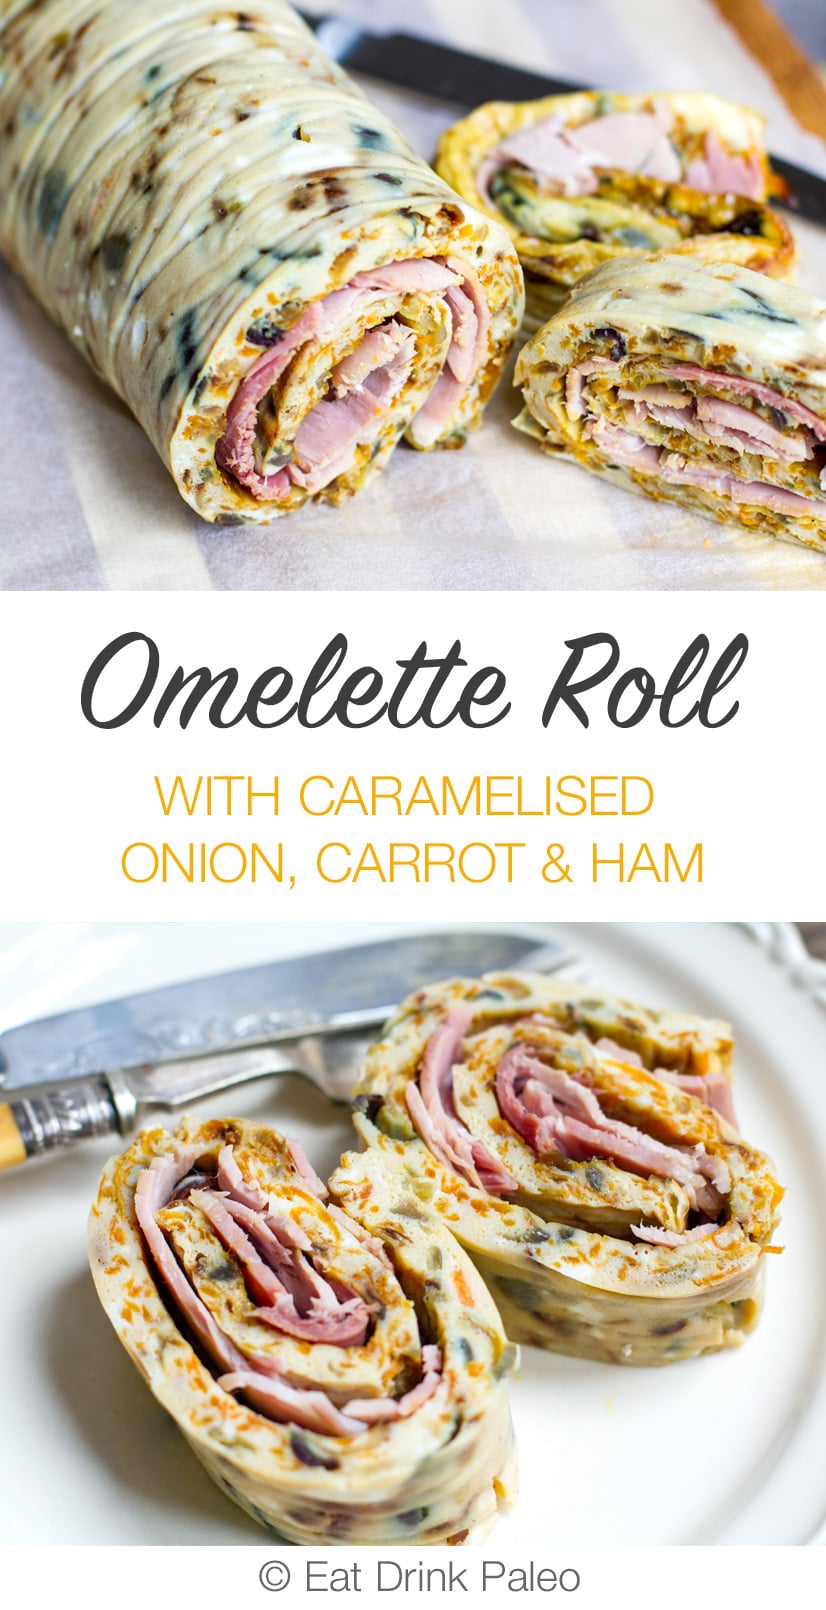 Baked Omelette Roll Recipe With Caramelised Onion, Carrot & Ham (Paleo, Gluten-Free)